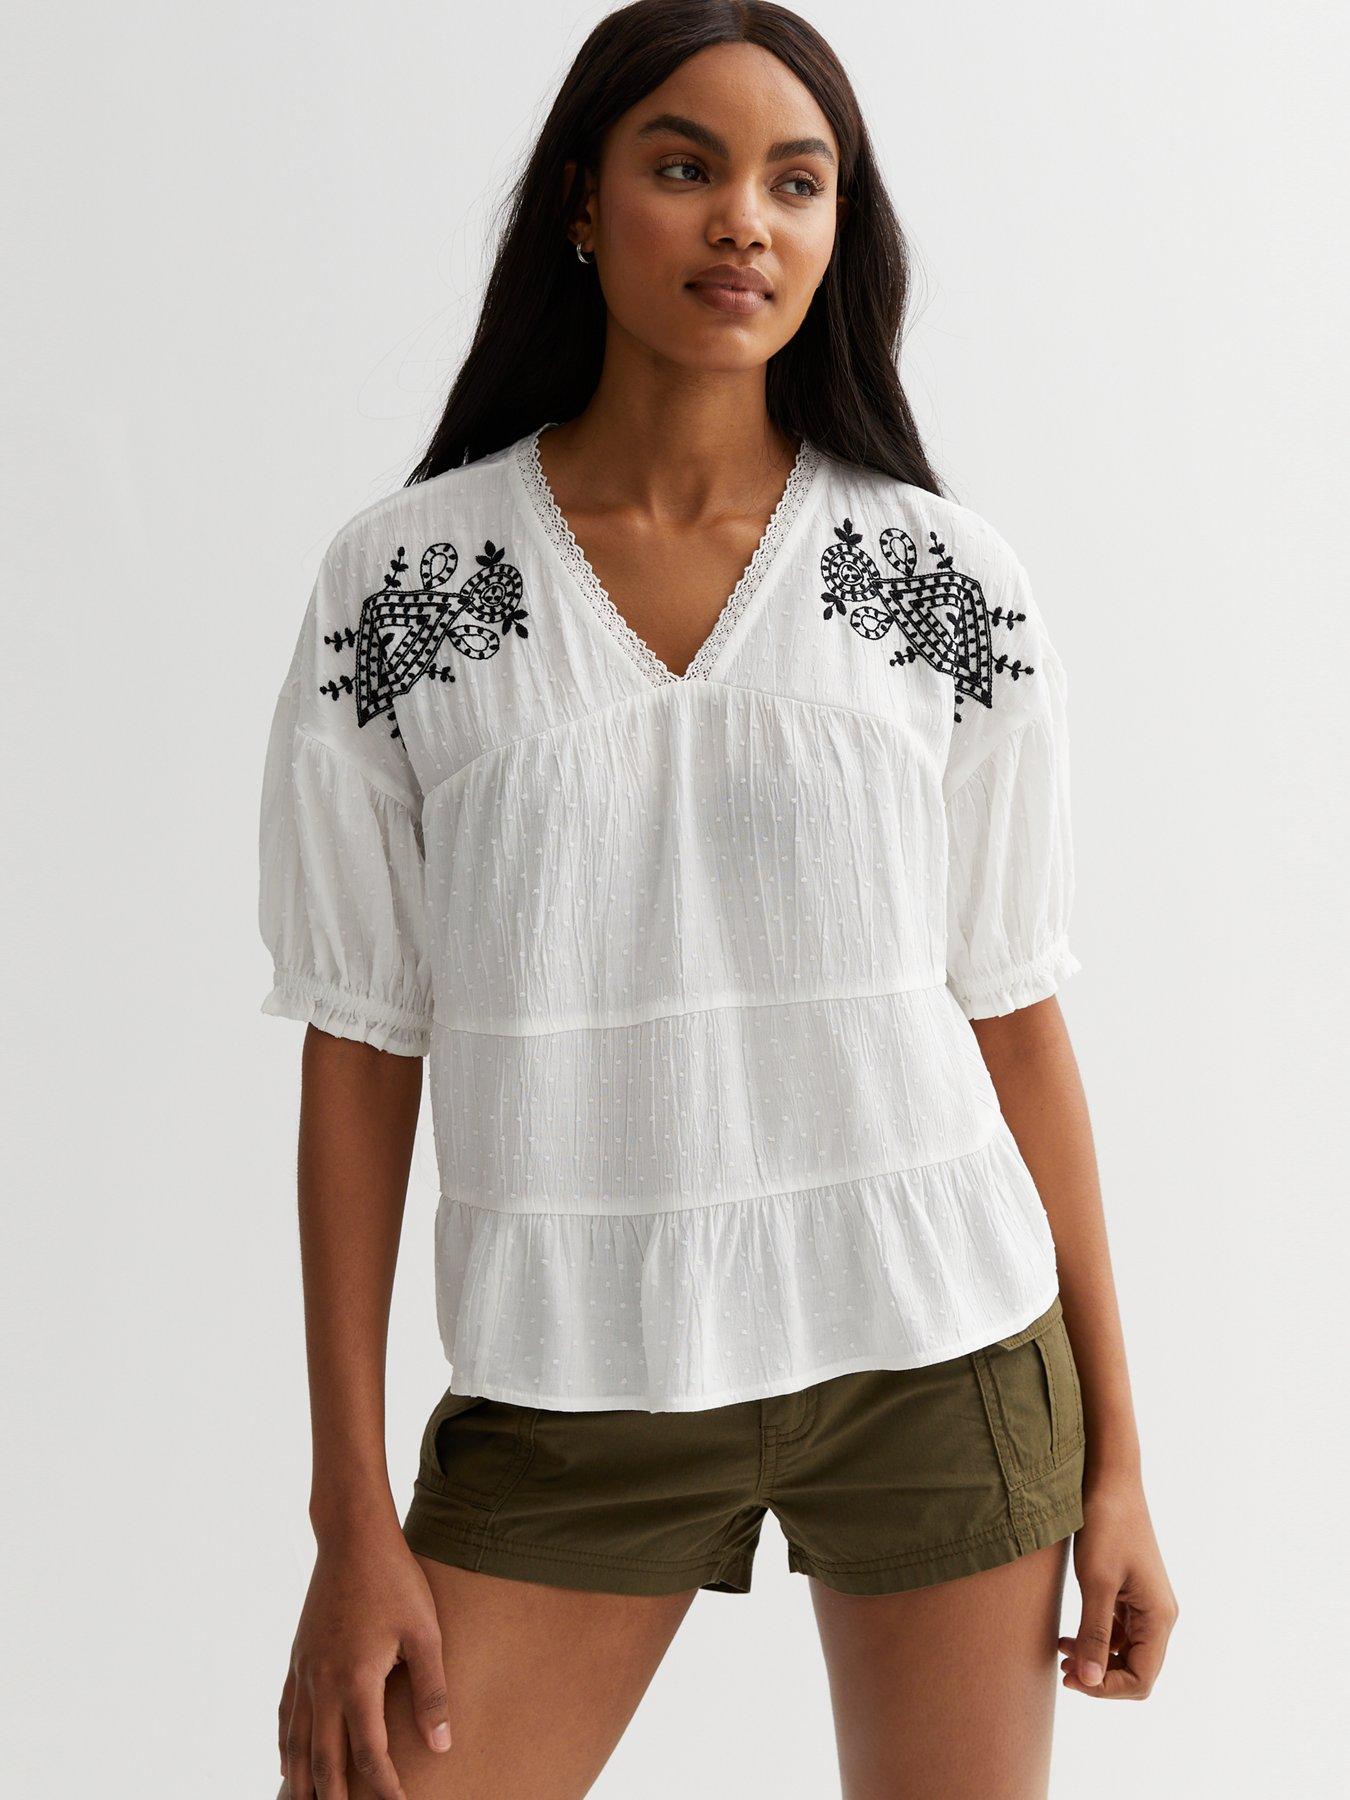 New Look White Embroidered Square Neck Shell Top